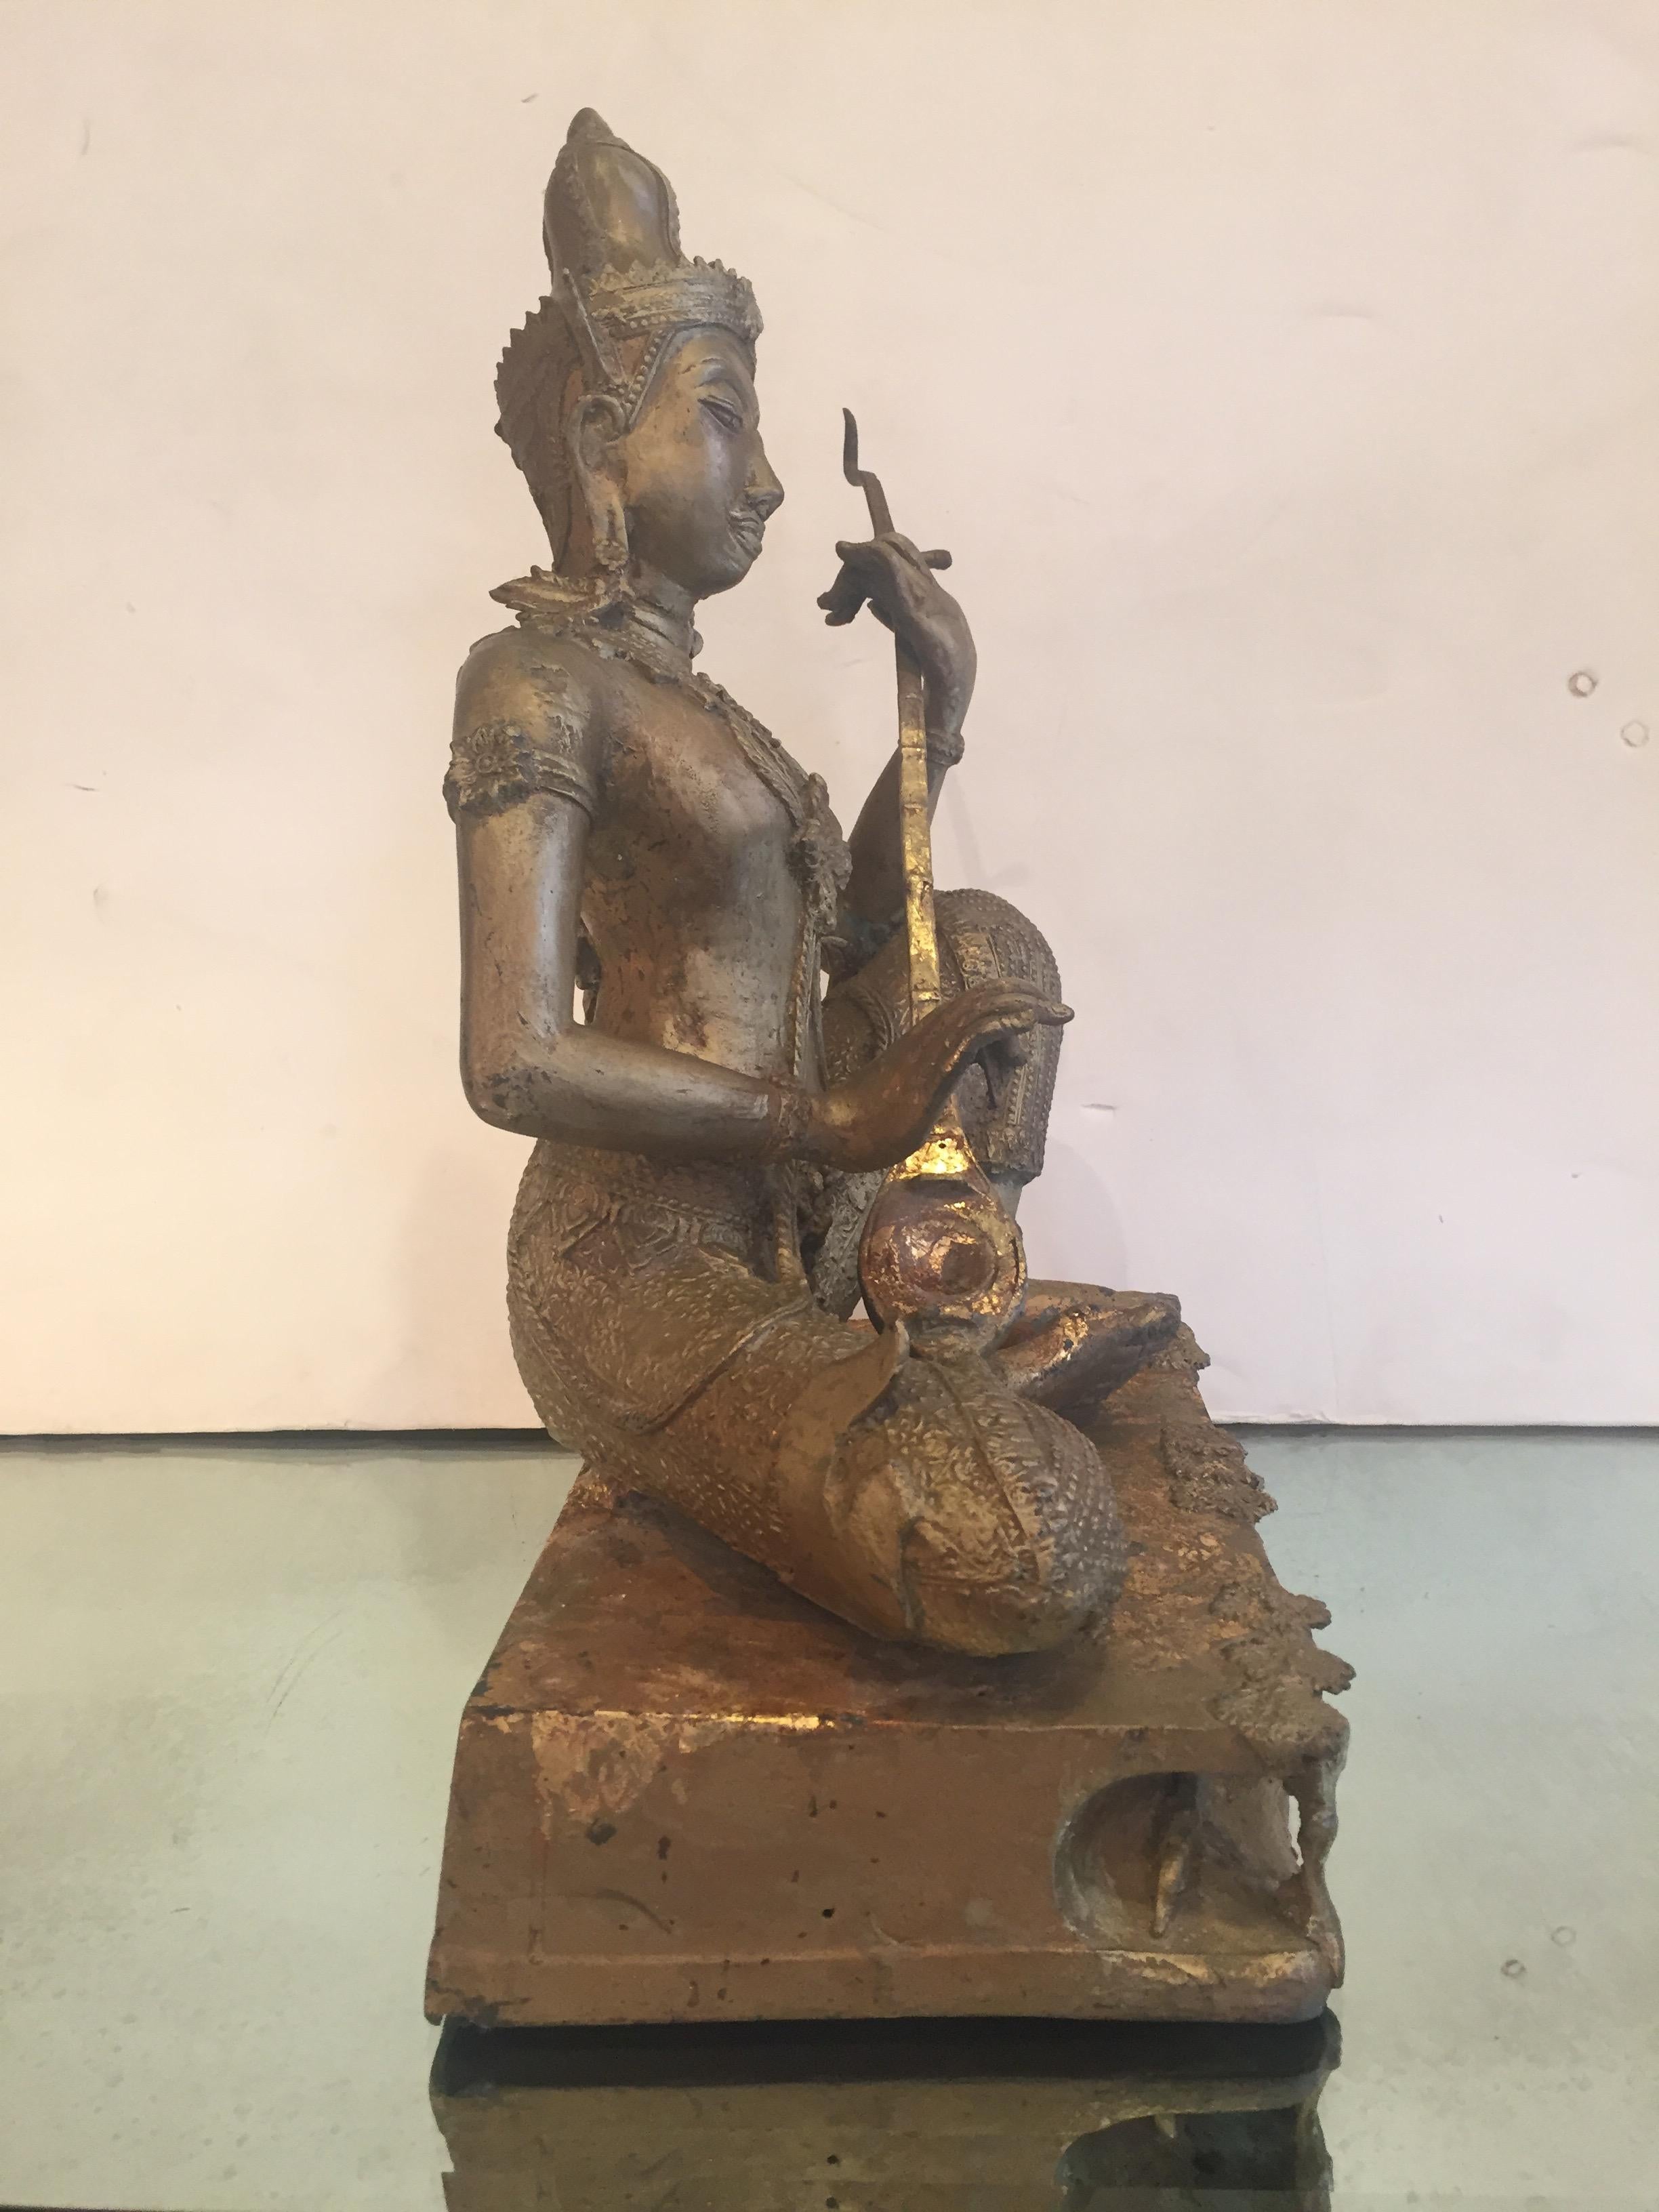 A lovely gilt bronze sculpture of a religious Thai deity sitting with one knee raised as he plays a musical instrument.